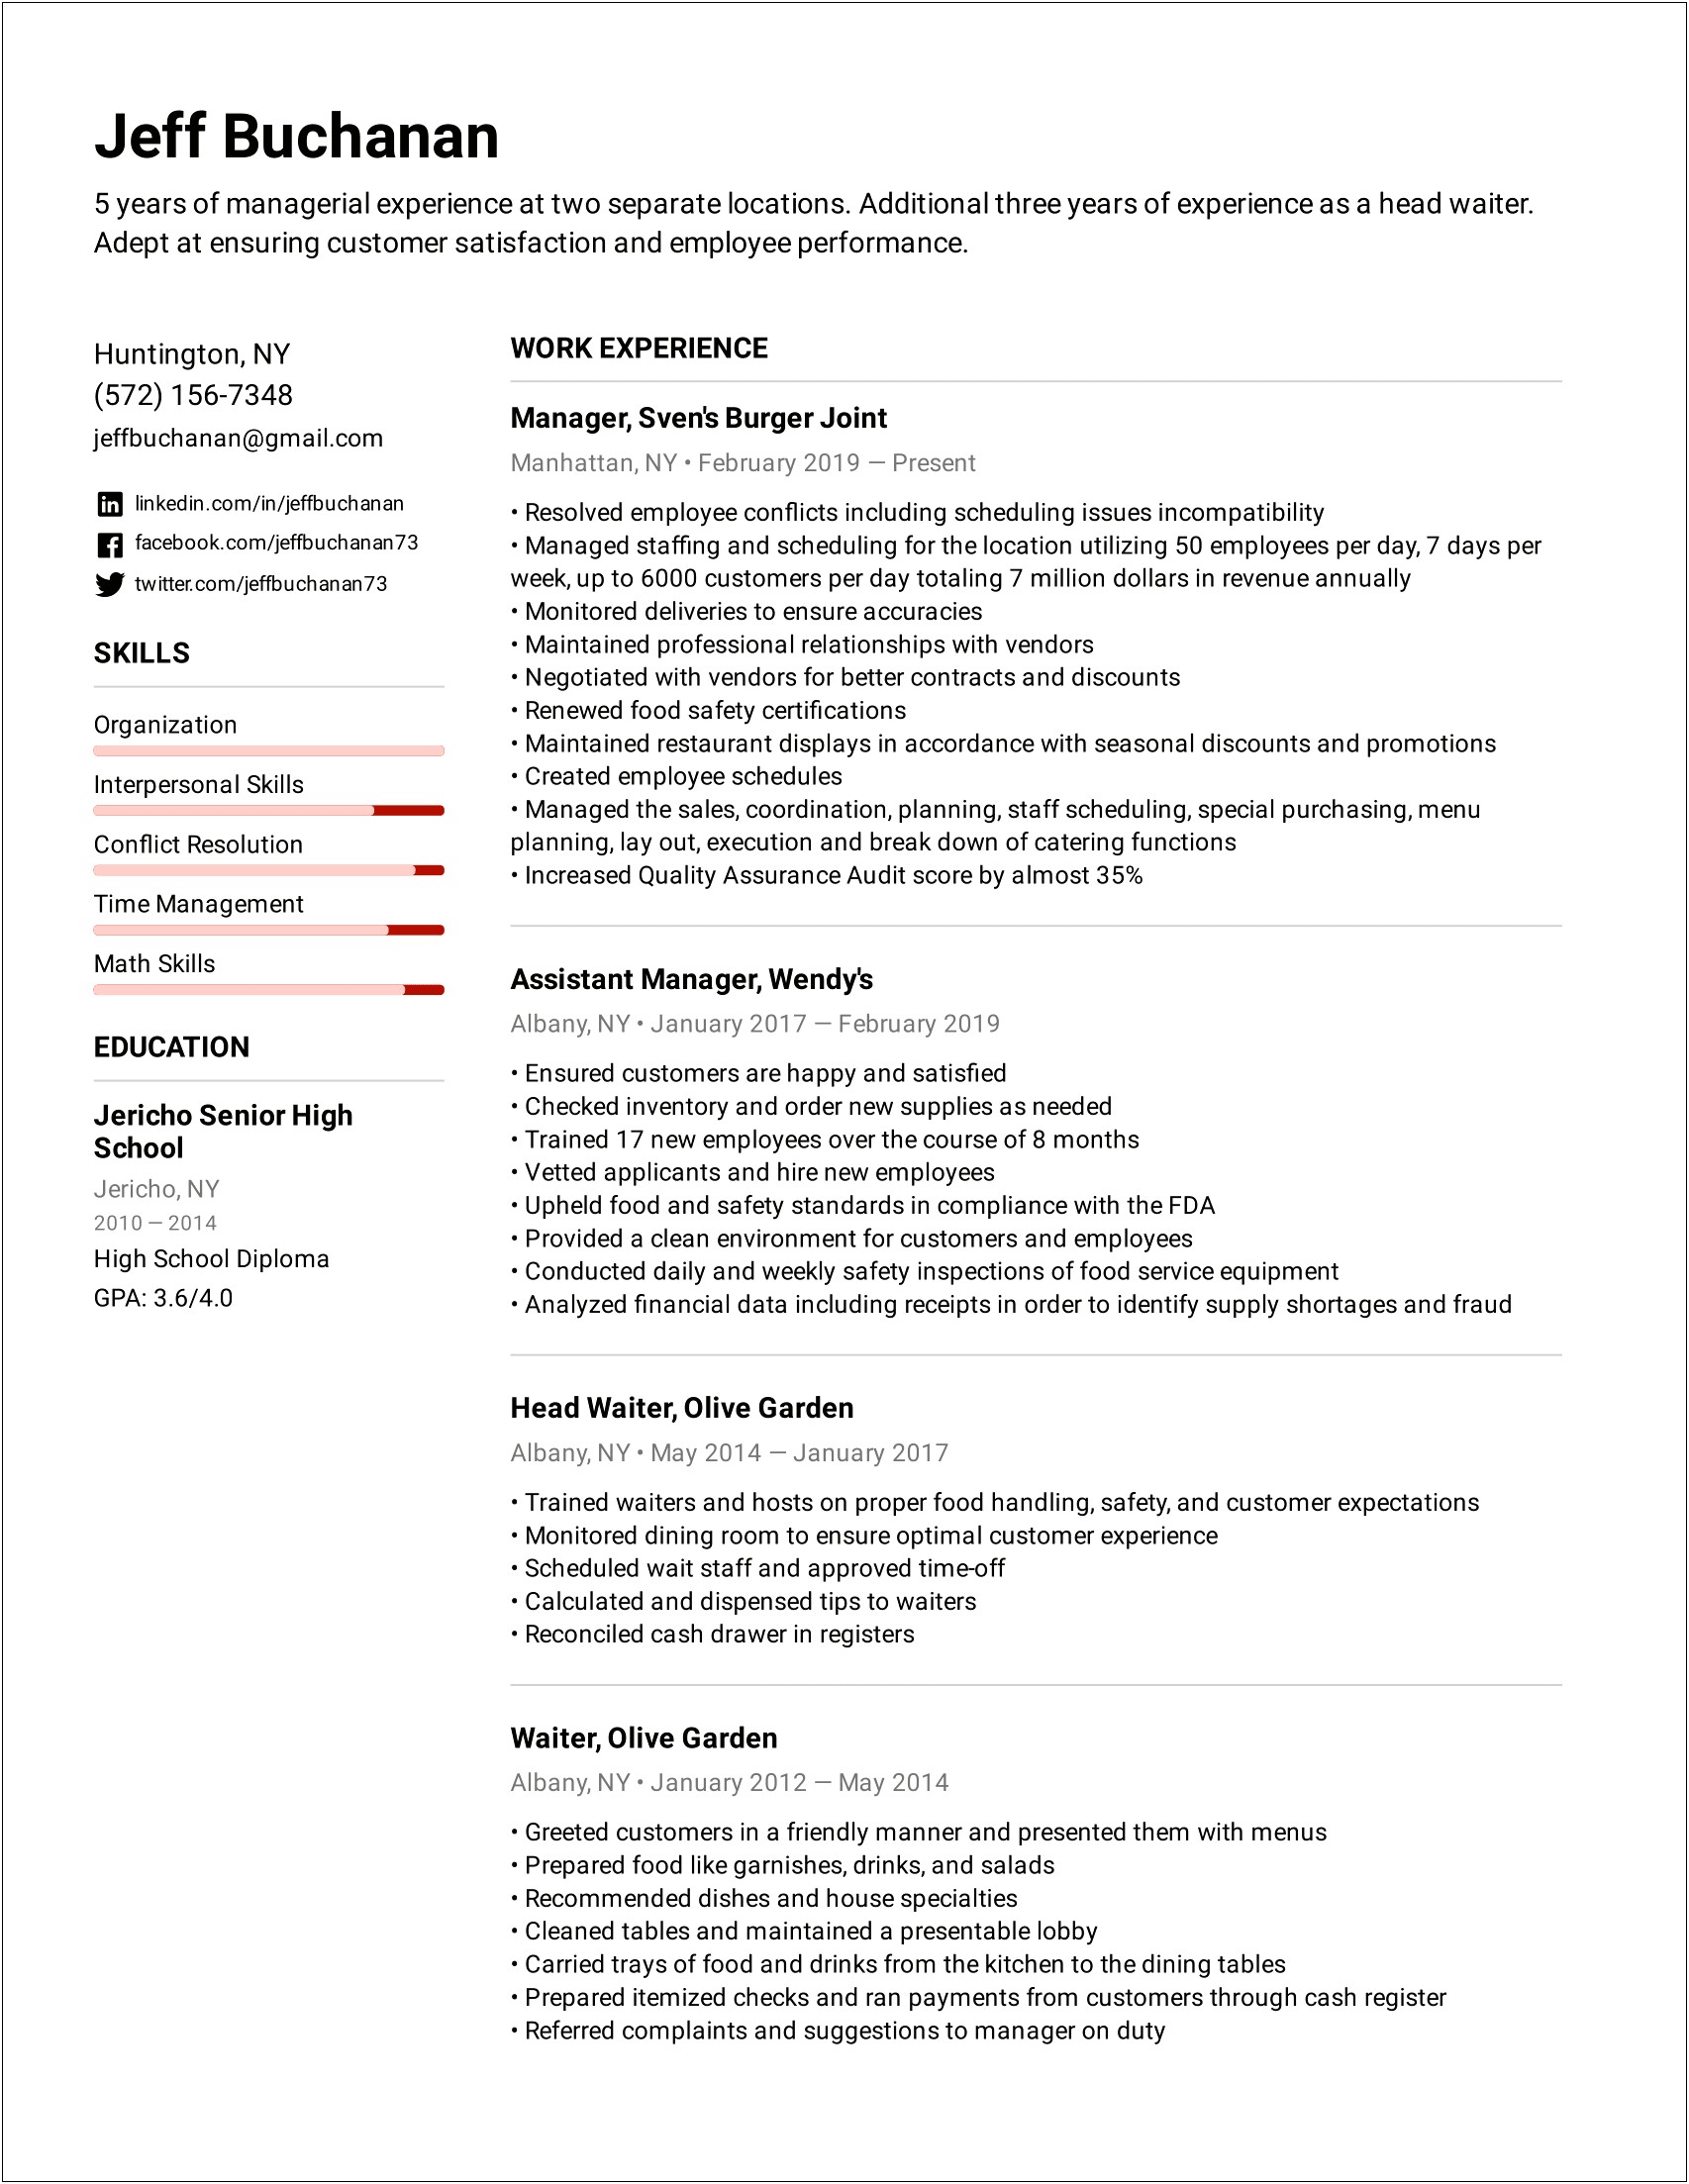 Management Skills And Abilities Resume Examples